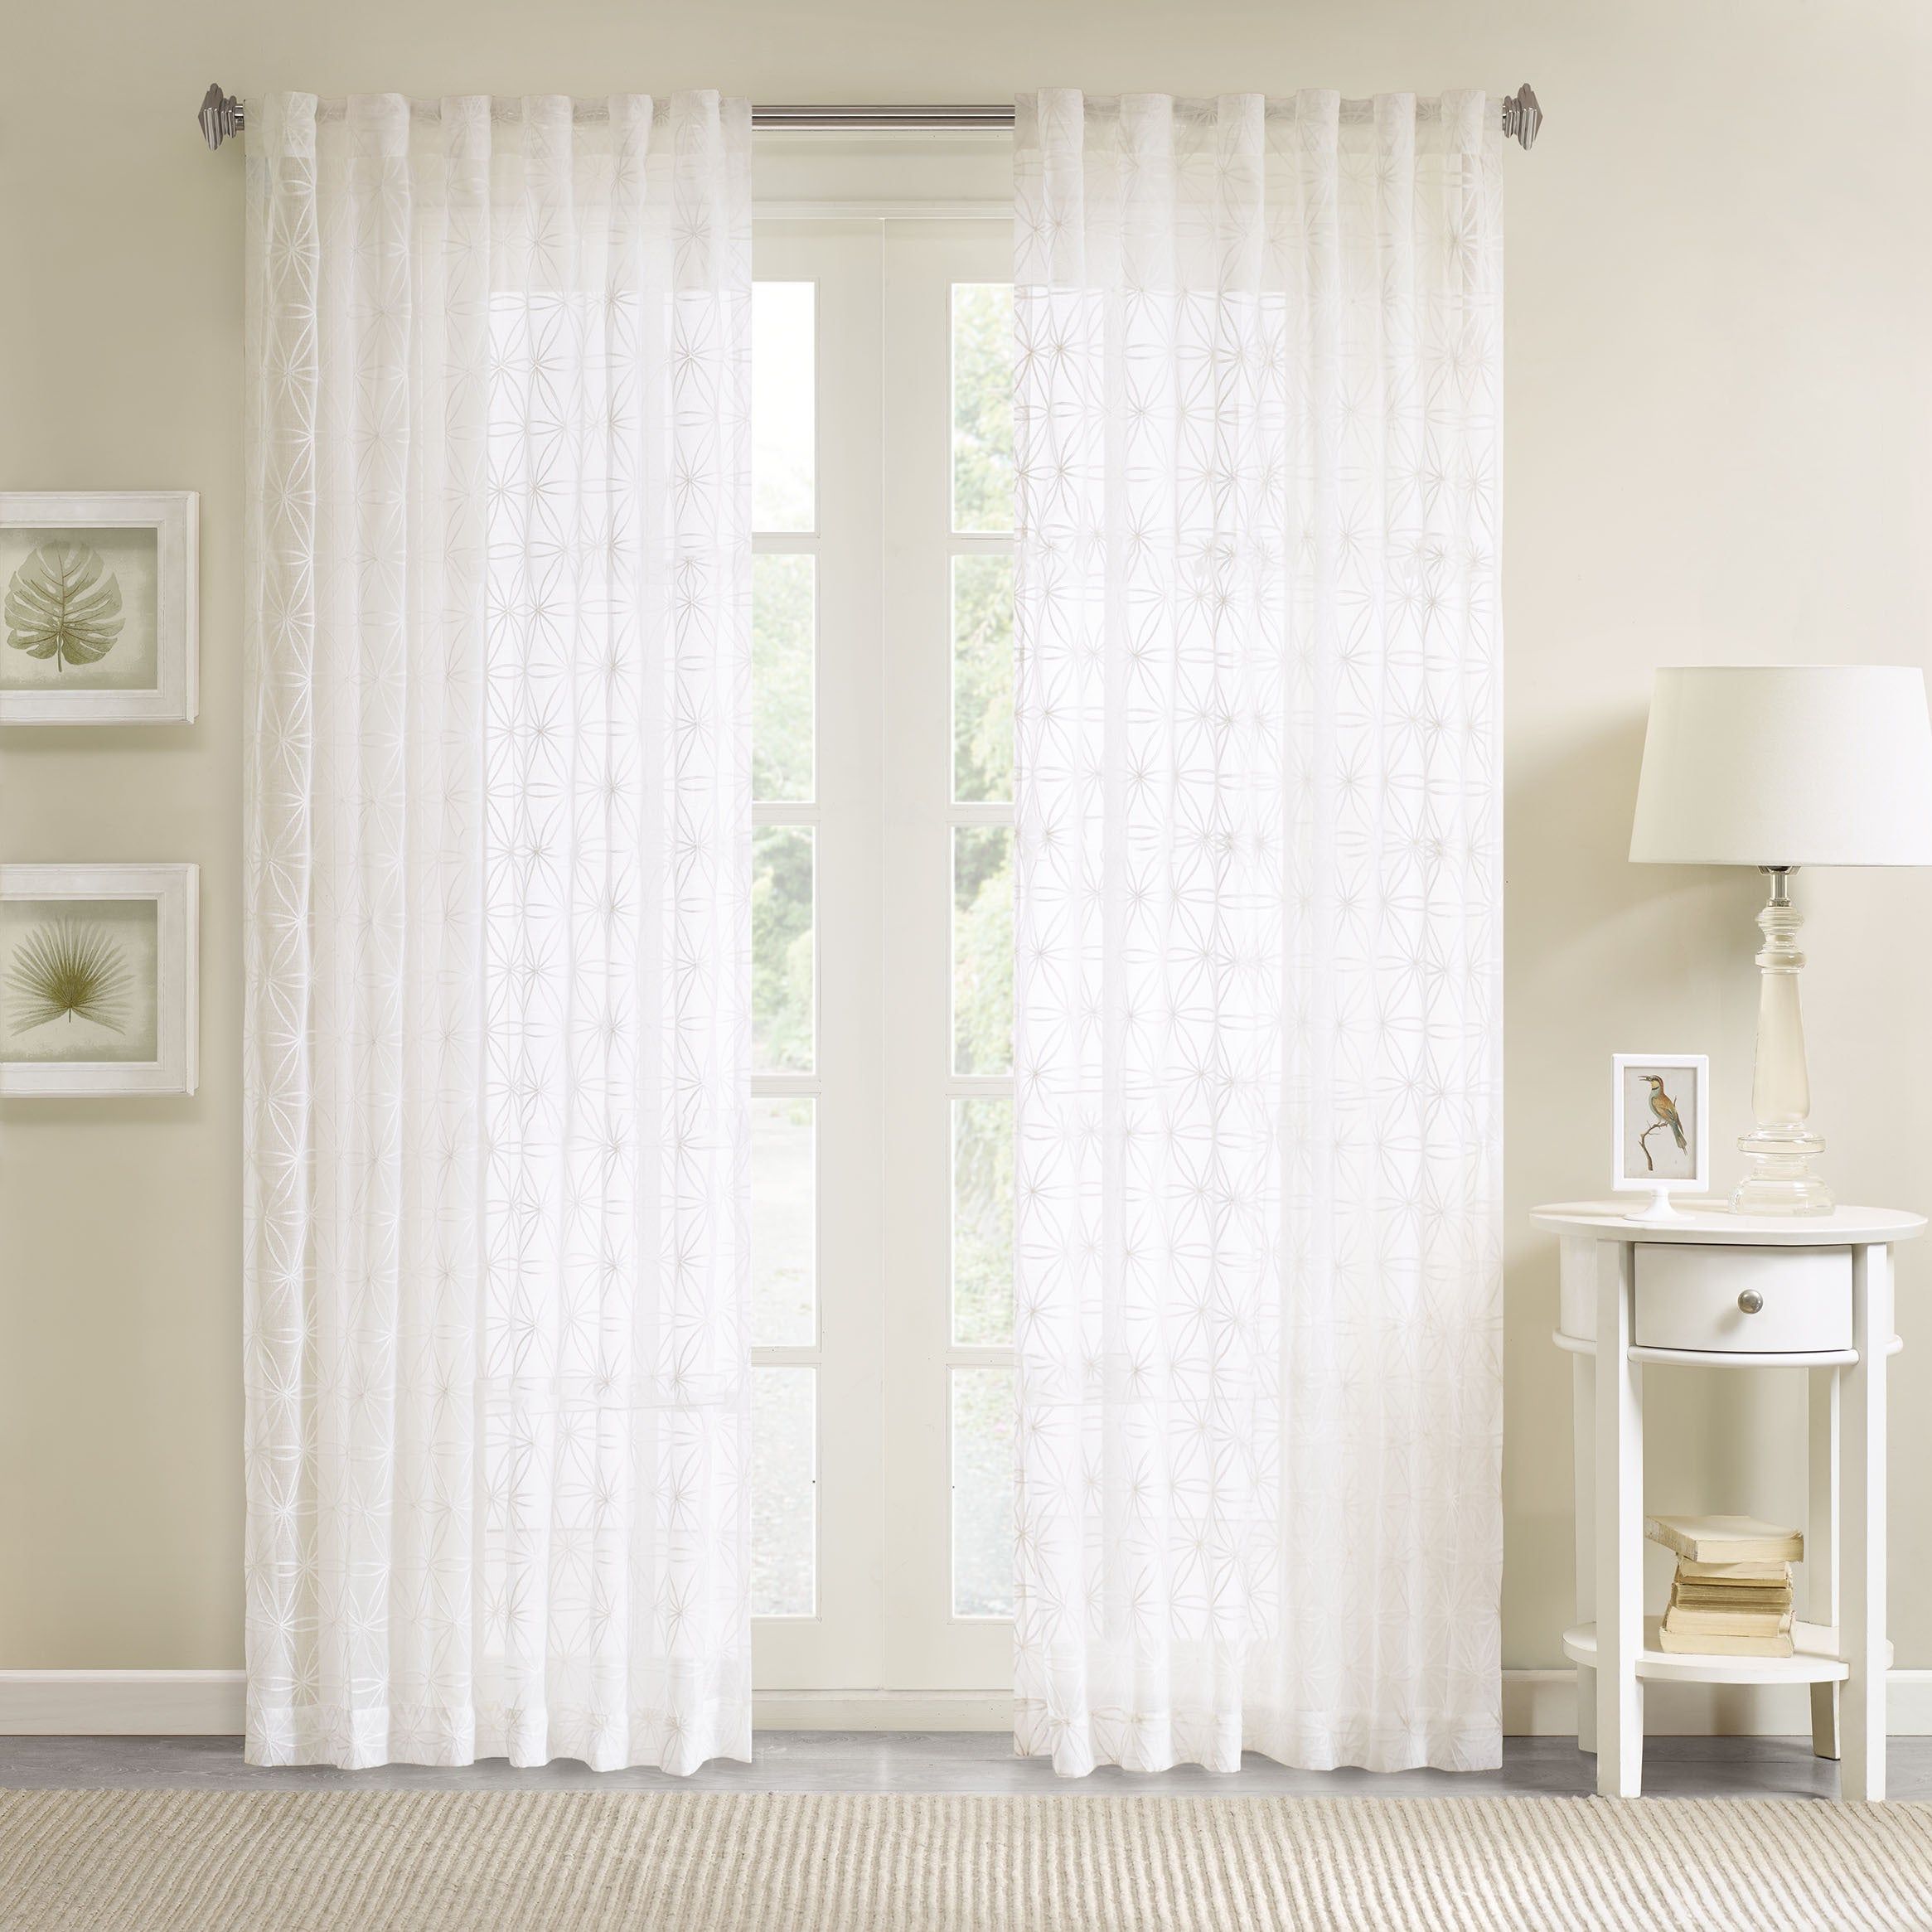 Madison Park Kida Embroidered Sheer Curtain Panel With Regard To Kida Embroidered Sheer Curtain Panels (View 1 of 20)